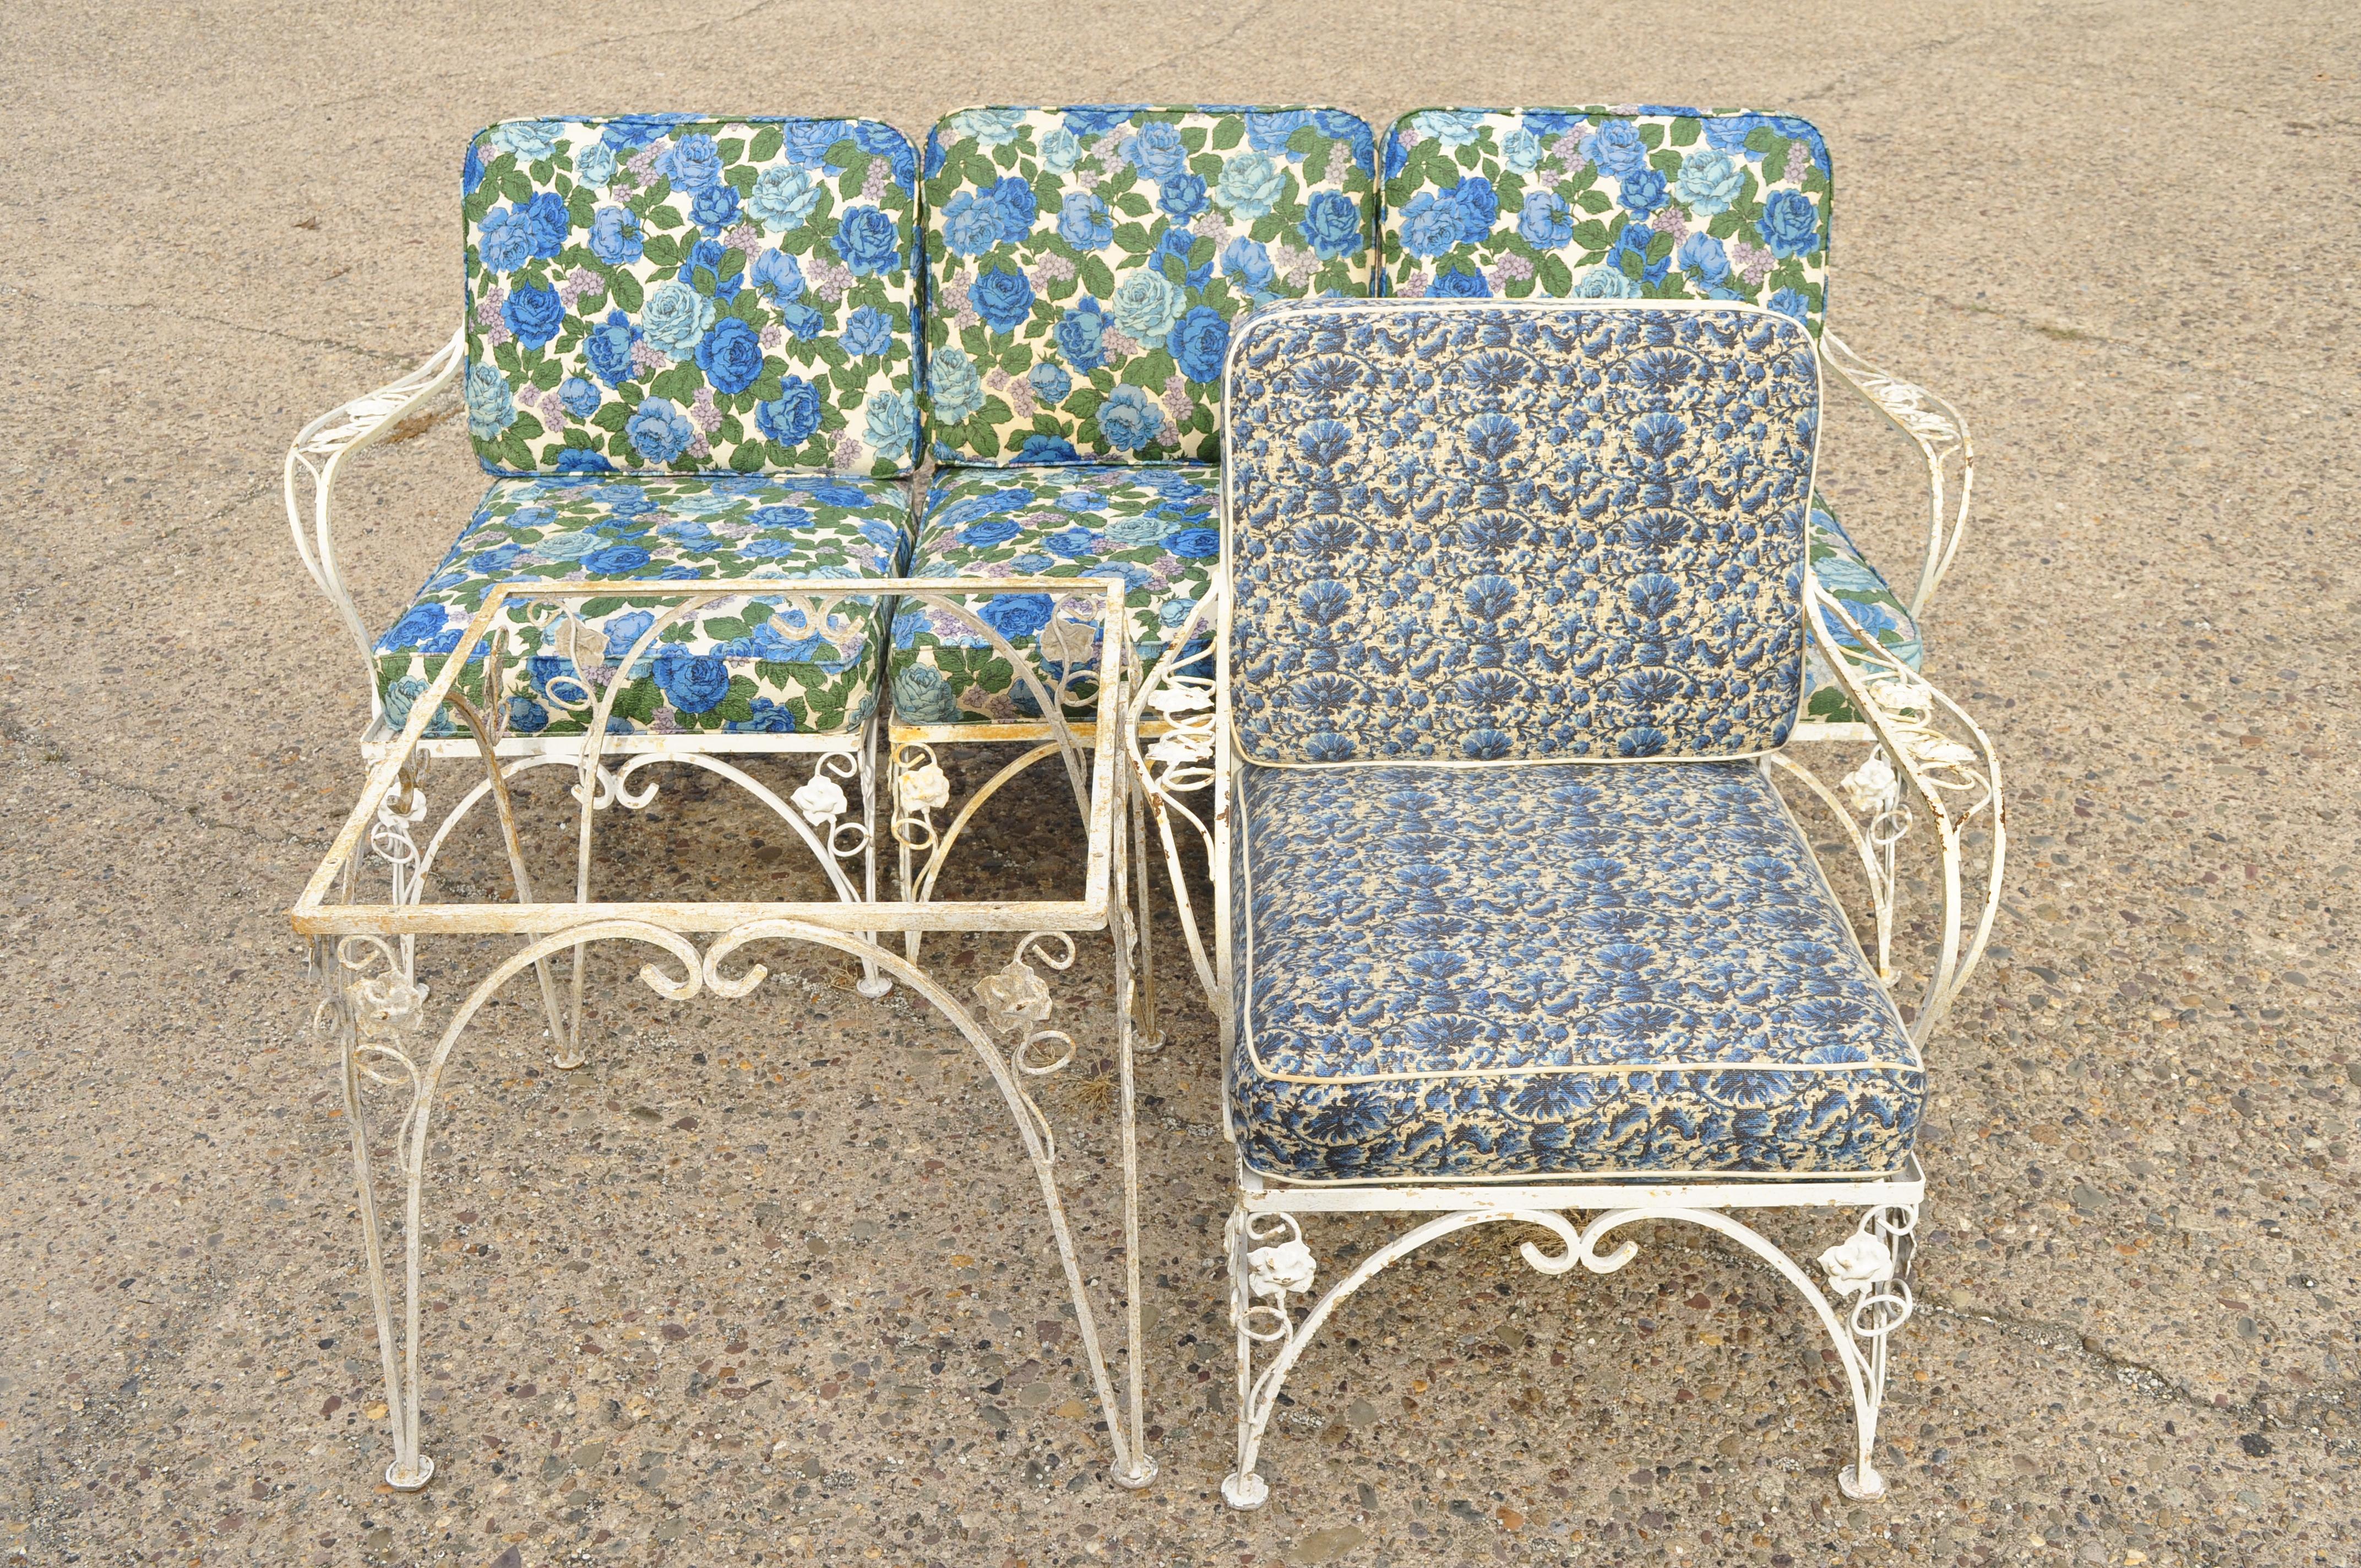 Woodard Chantilly Rose Garden Patio Set Sofa Lounge Arm Chairs Side Tables 2